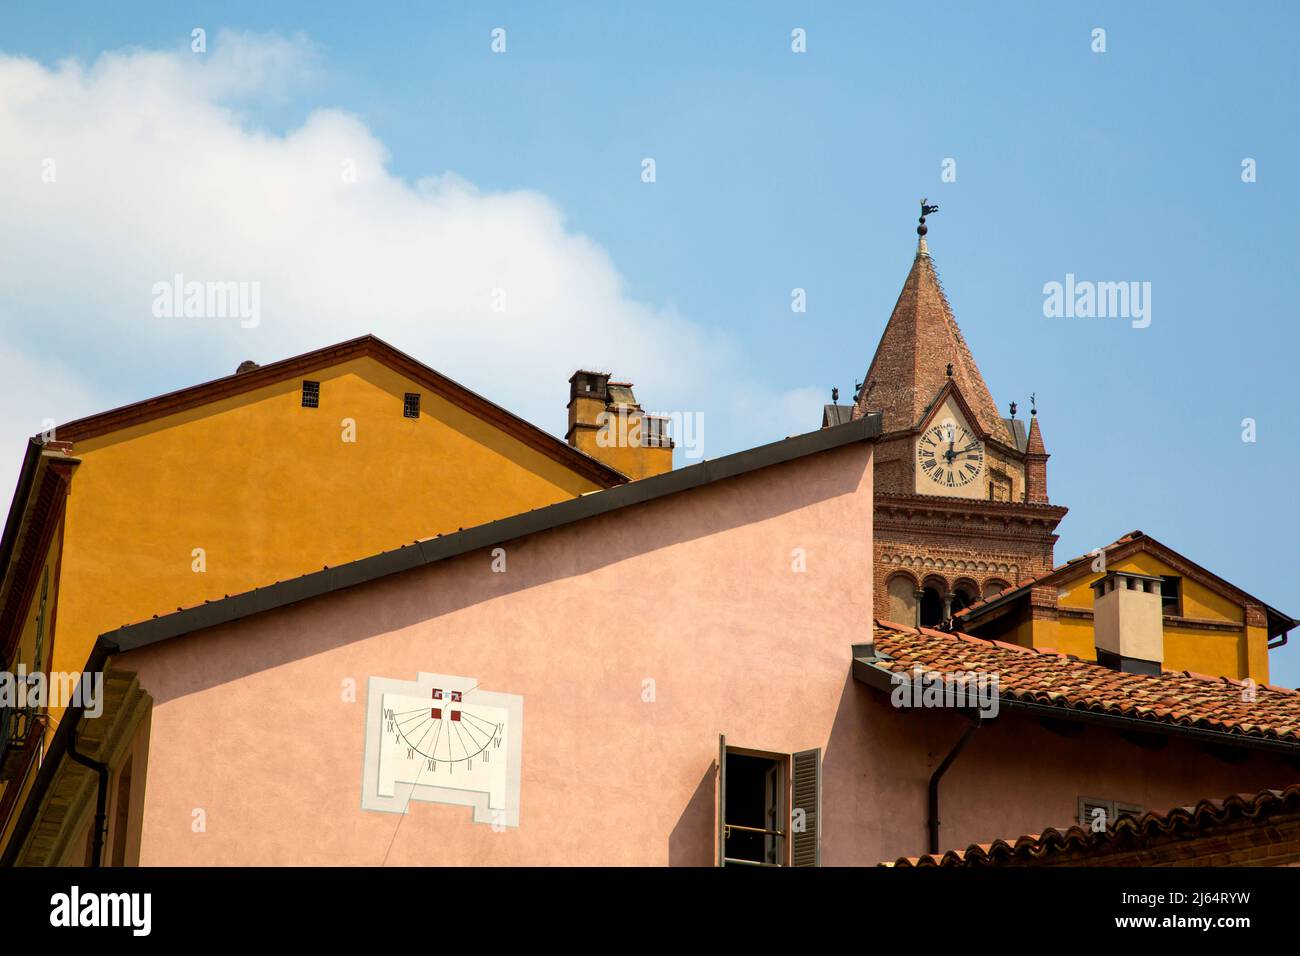 Buildings in Alba showing various architecture styles including the tower of Chiesa di San Domenica. Stock Photo